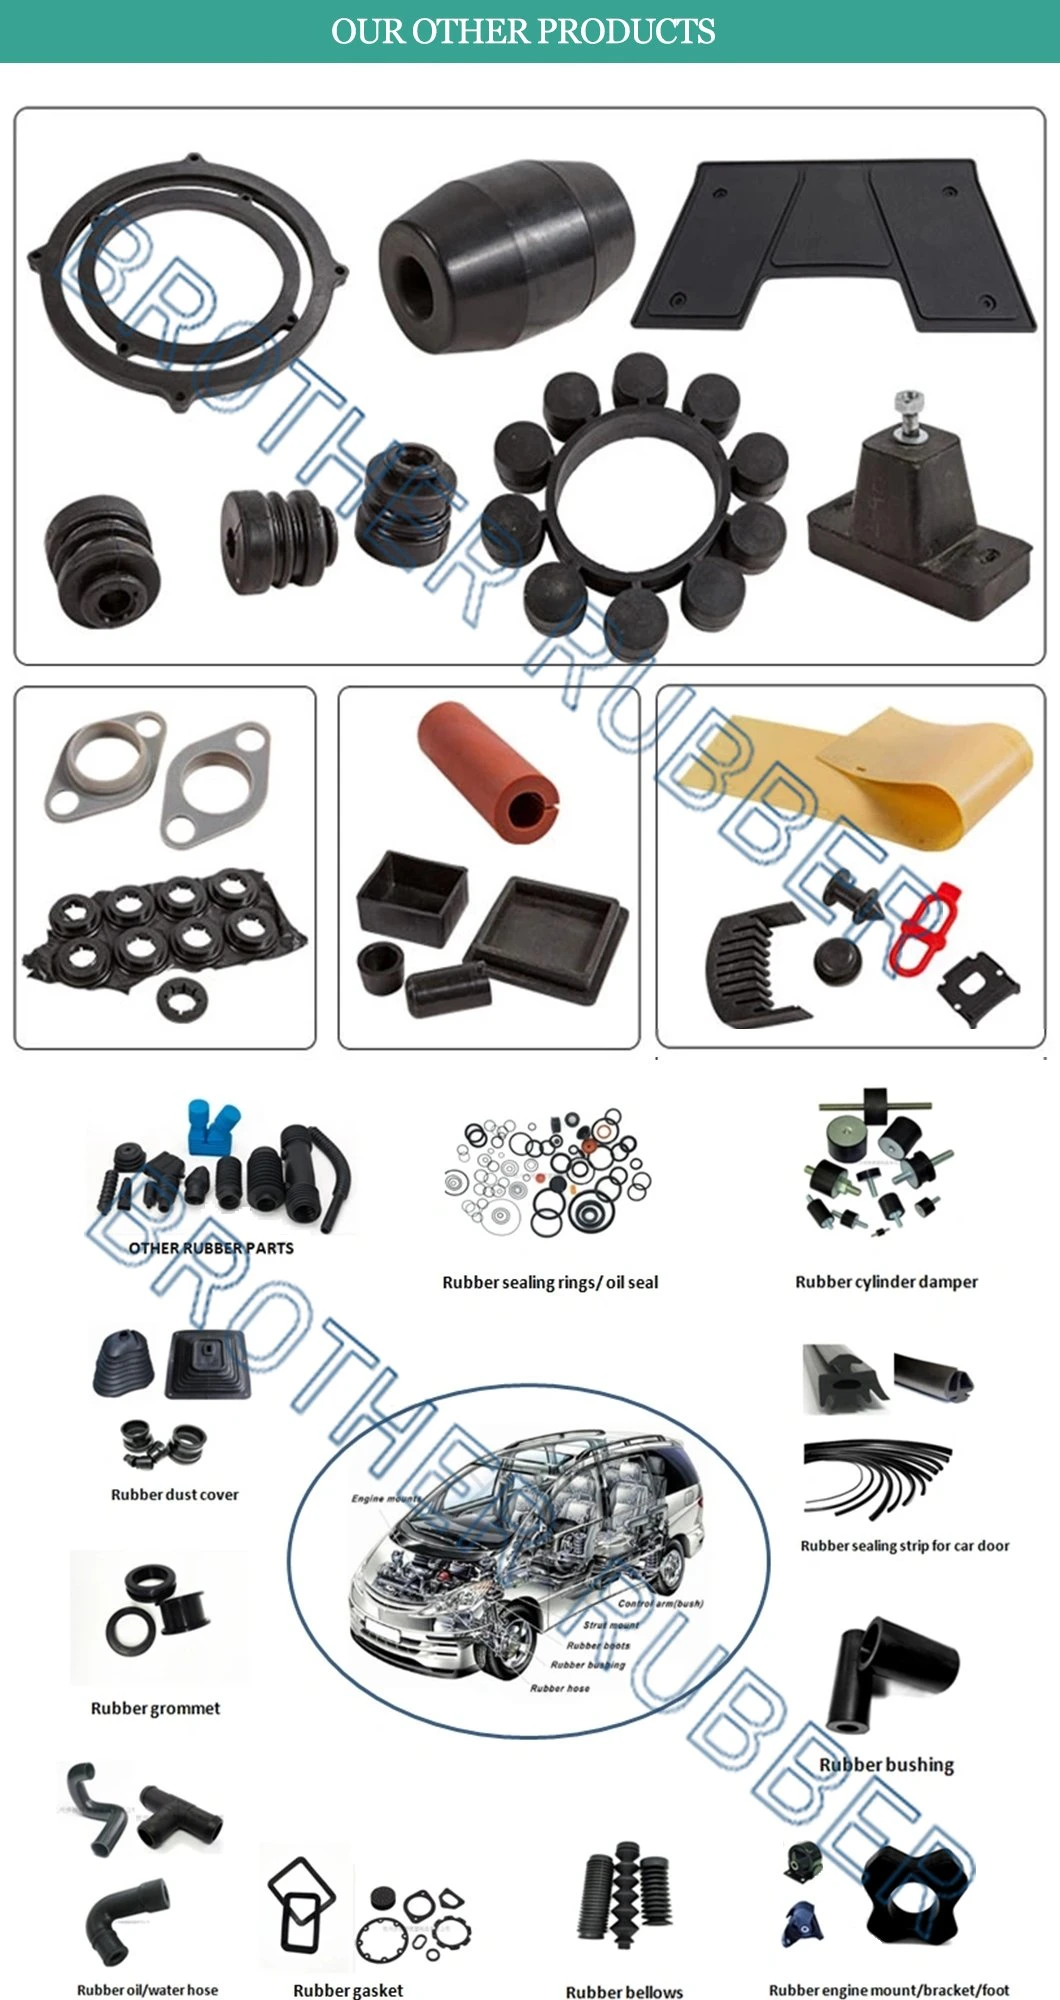 Rubber Buffer and Bump Stop for Shock Absorber